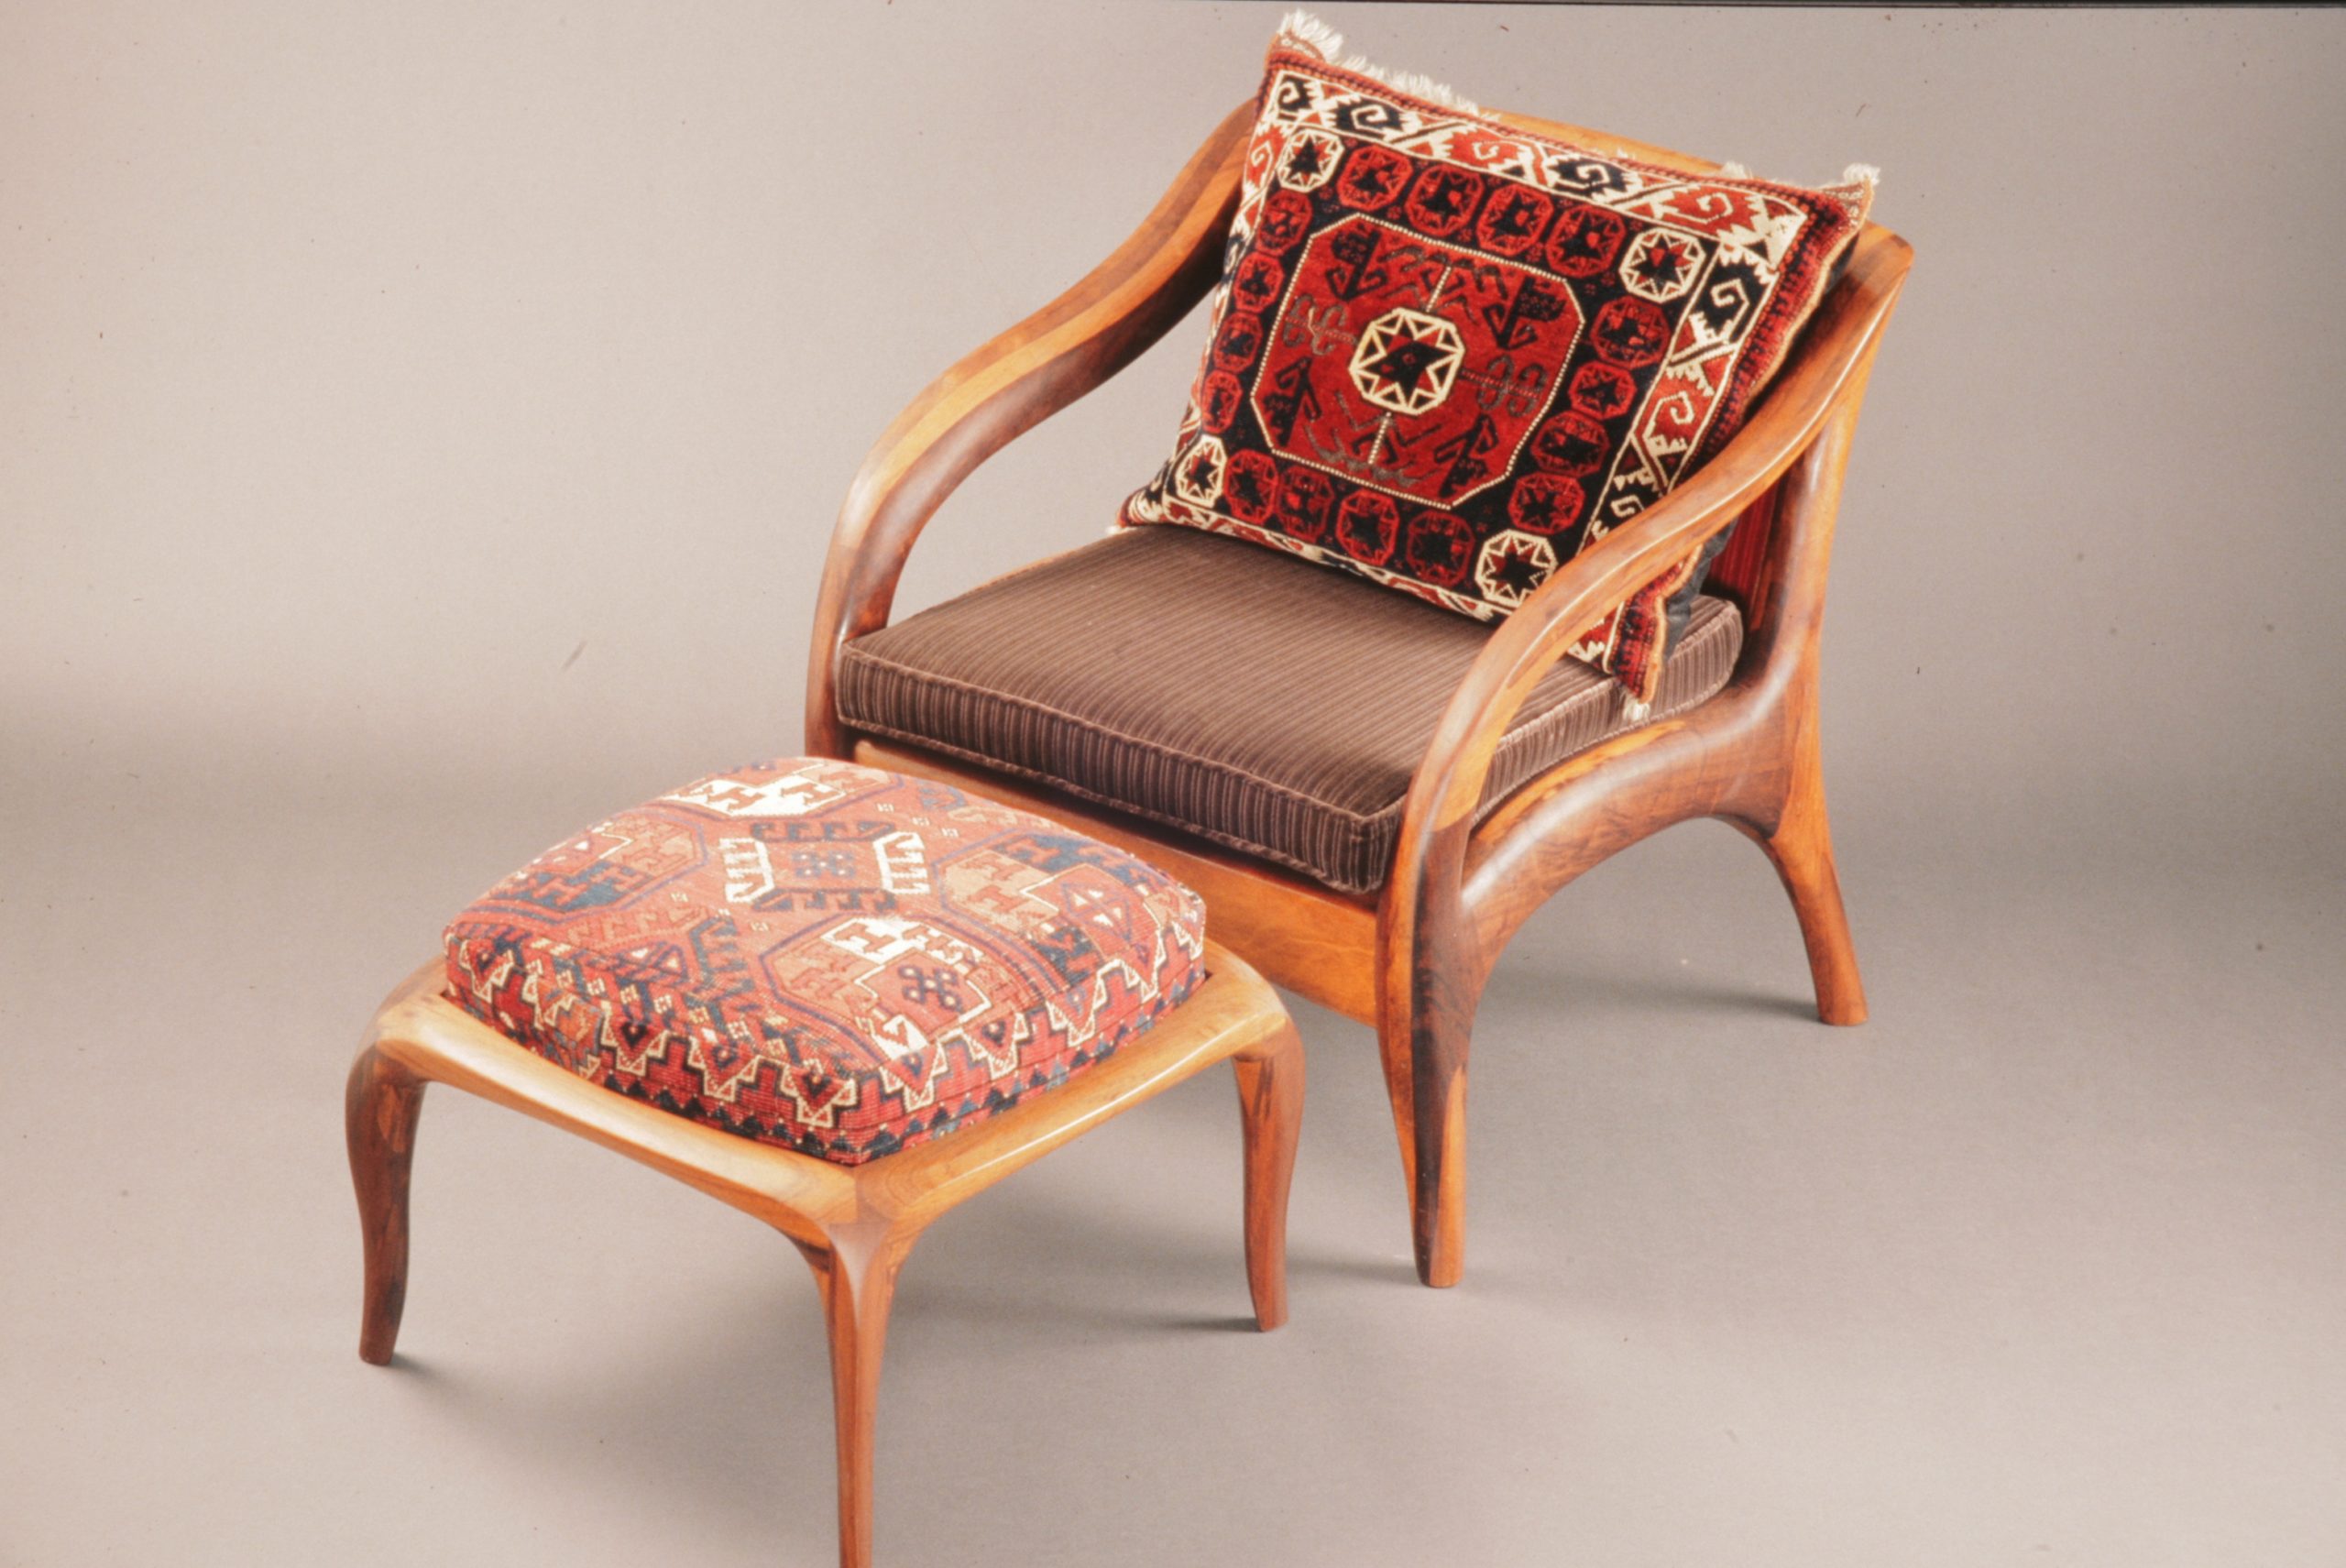 Seale-lounge-chair